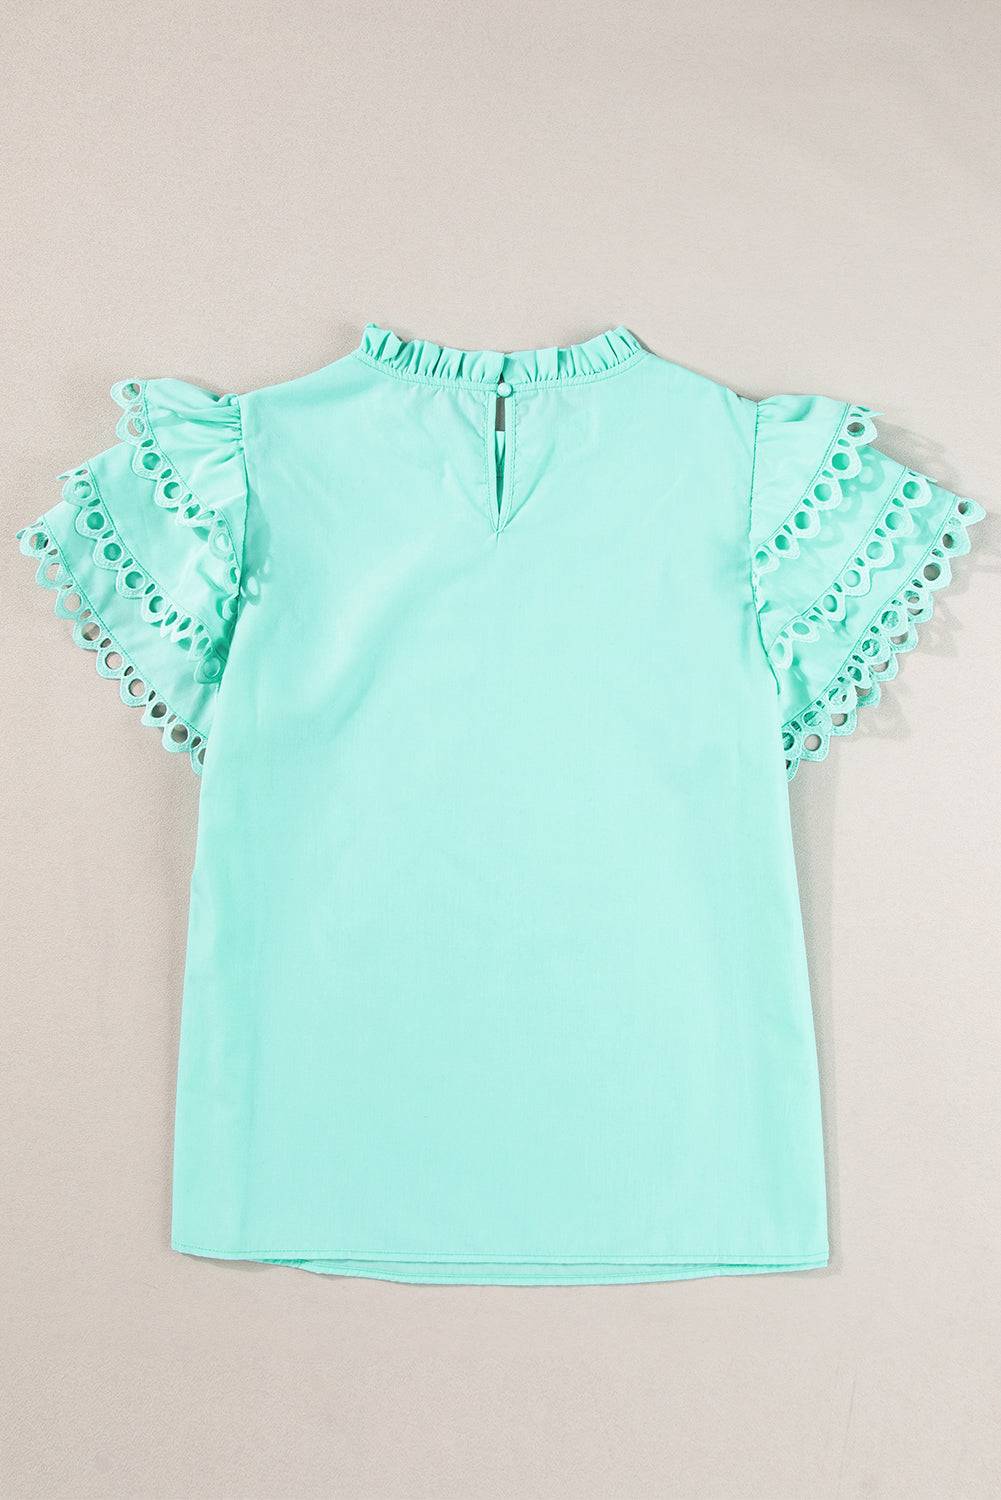 a green top with ruffles on the sleeves